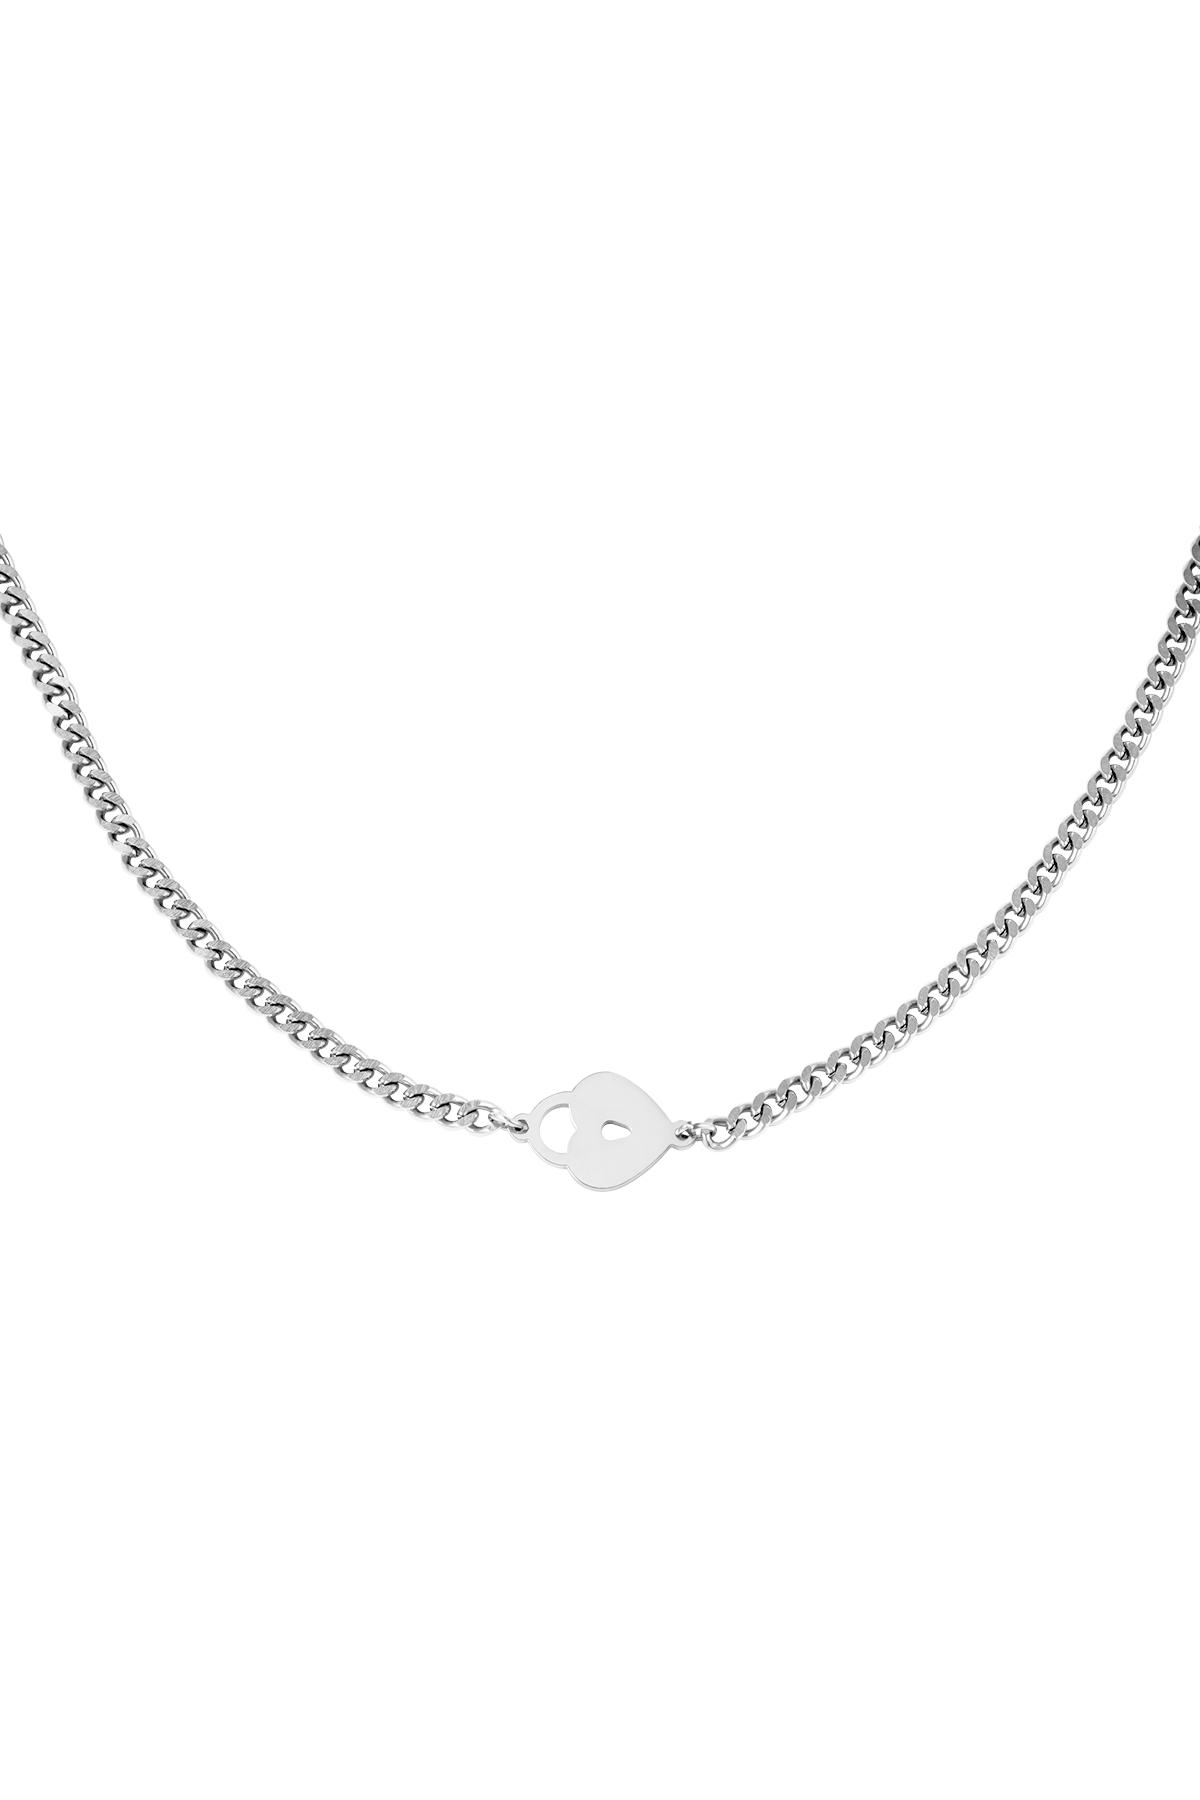 Necklace Locked Heart Silver Stainless Steel h5 